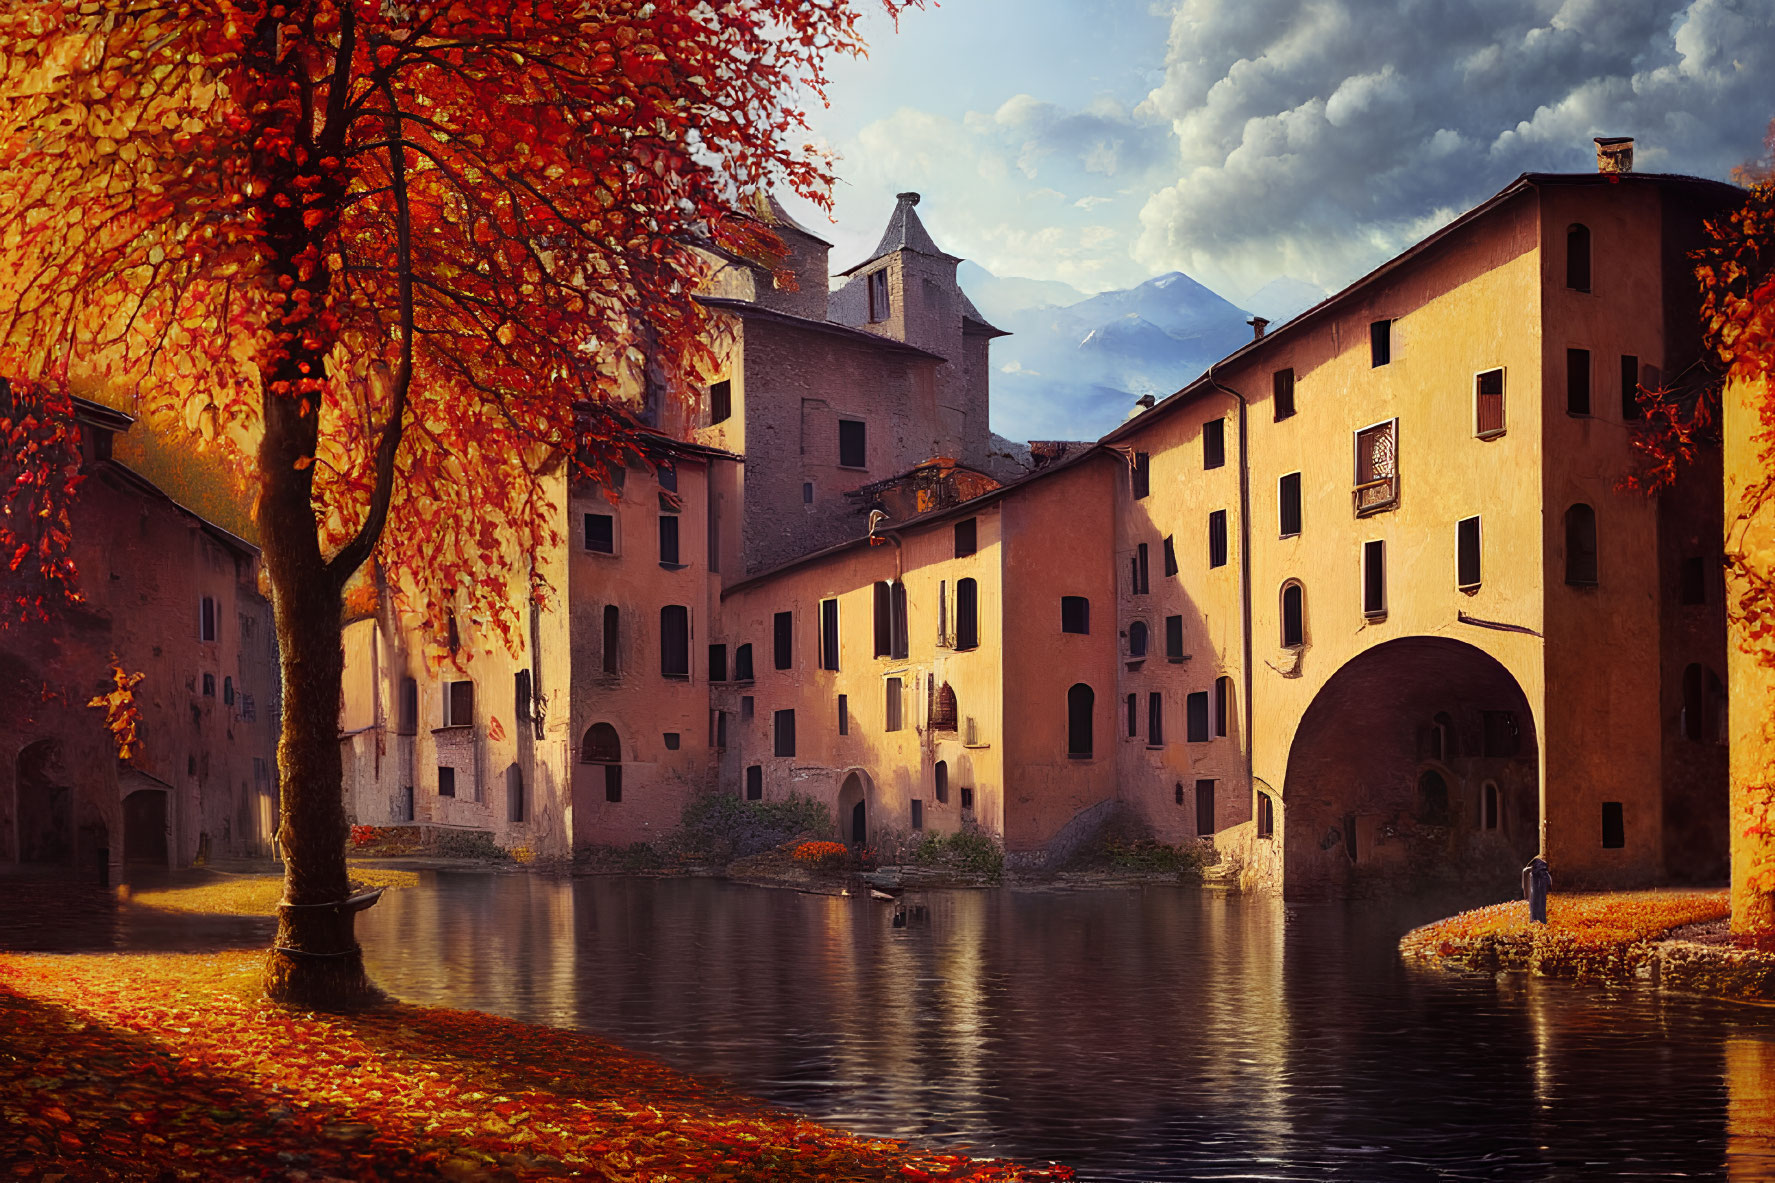 Historic orange buildings by river with autumn tree and distant mountains